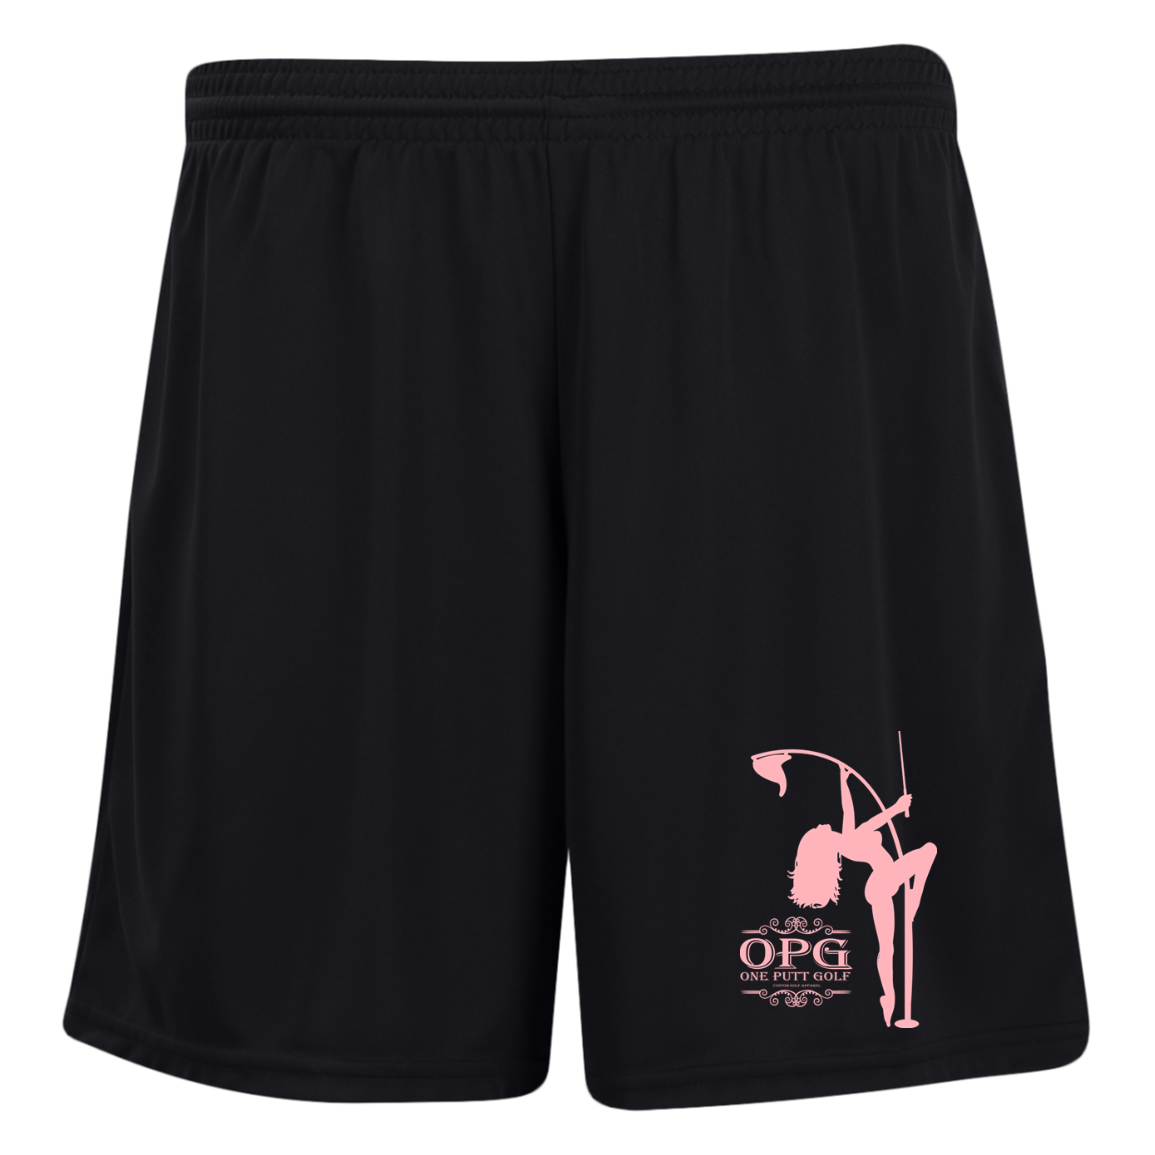 OPG Custom Design #10. Lady on Front / Flag Pole Dancer On Back. Ladies' Moisture-Wicking 7 inch Inseam Training Shorts